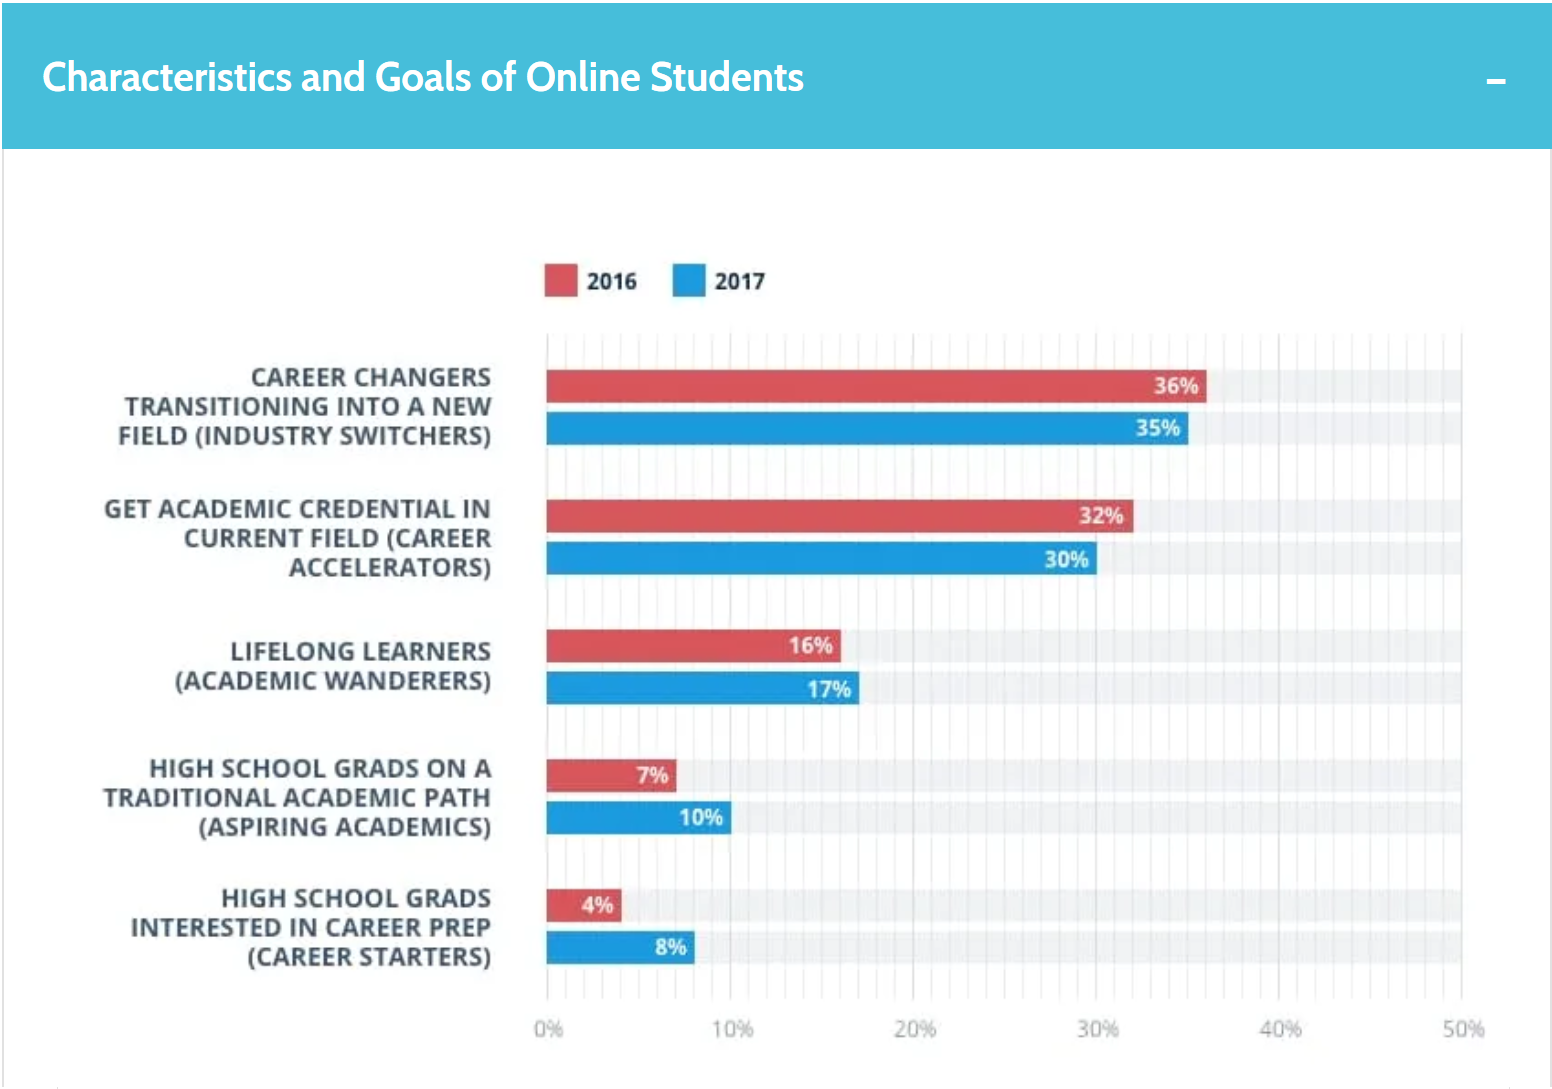 Characteristics and goals of online students: in 2016, 36% of students were career changers transitioning into a new field (industry switchers), 32% of students were aiming to get academic credential in current field (career accelerators), 16% were lifelong learners (academic wanderers), 7% were high school grads on a traditional academic path (aspiring academics) and 4% were high school grads interested in career prep (career starters). In 2017, 35% of students were career changers transitioning into a new field (industry switchers), 30% of students were aiming to get academic credential in current field (career accelerators), 17% were lifelong learners (academic wanderers), 10% were high school grads on a traditional academic path (aspiring academics) and 8% were high school grads interested in career prep (career starters)